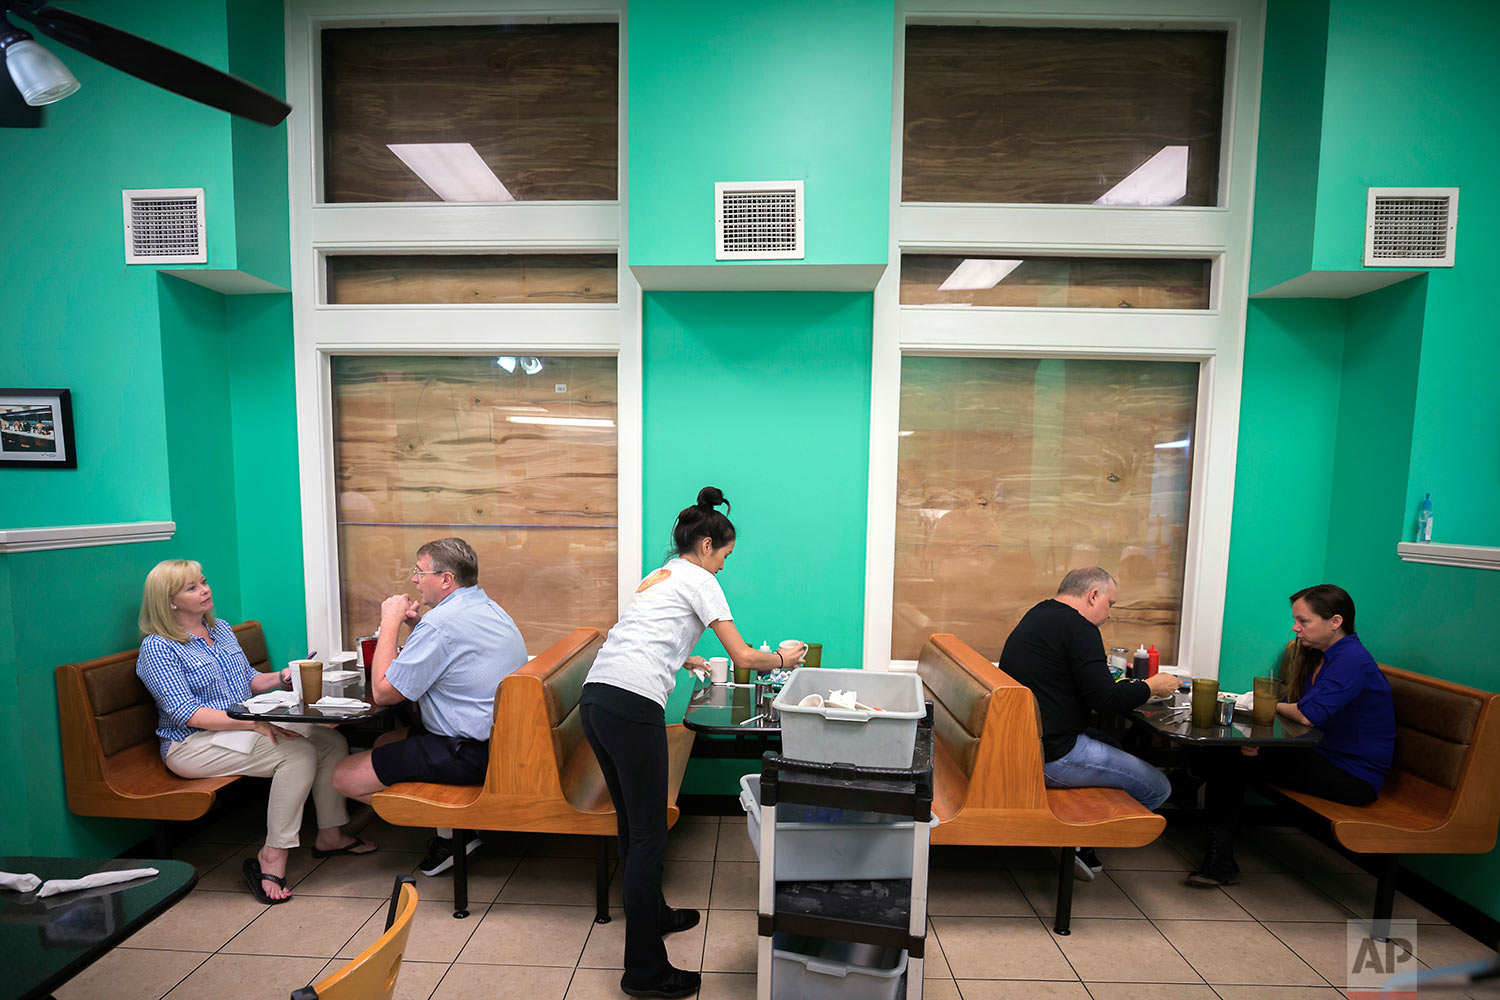  Henry's Restaurant manager Nhi Brayman, center, cleans a table while customers eat breakfast behind boarded up windows, Sunday, Sept., 10, 2017, in downtown Savannah, Ga. (AP Photo/Stephen B. Morton) 